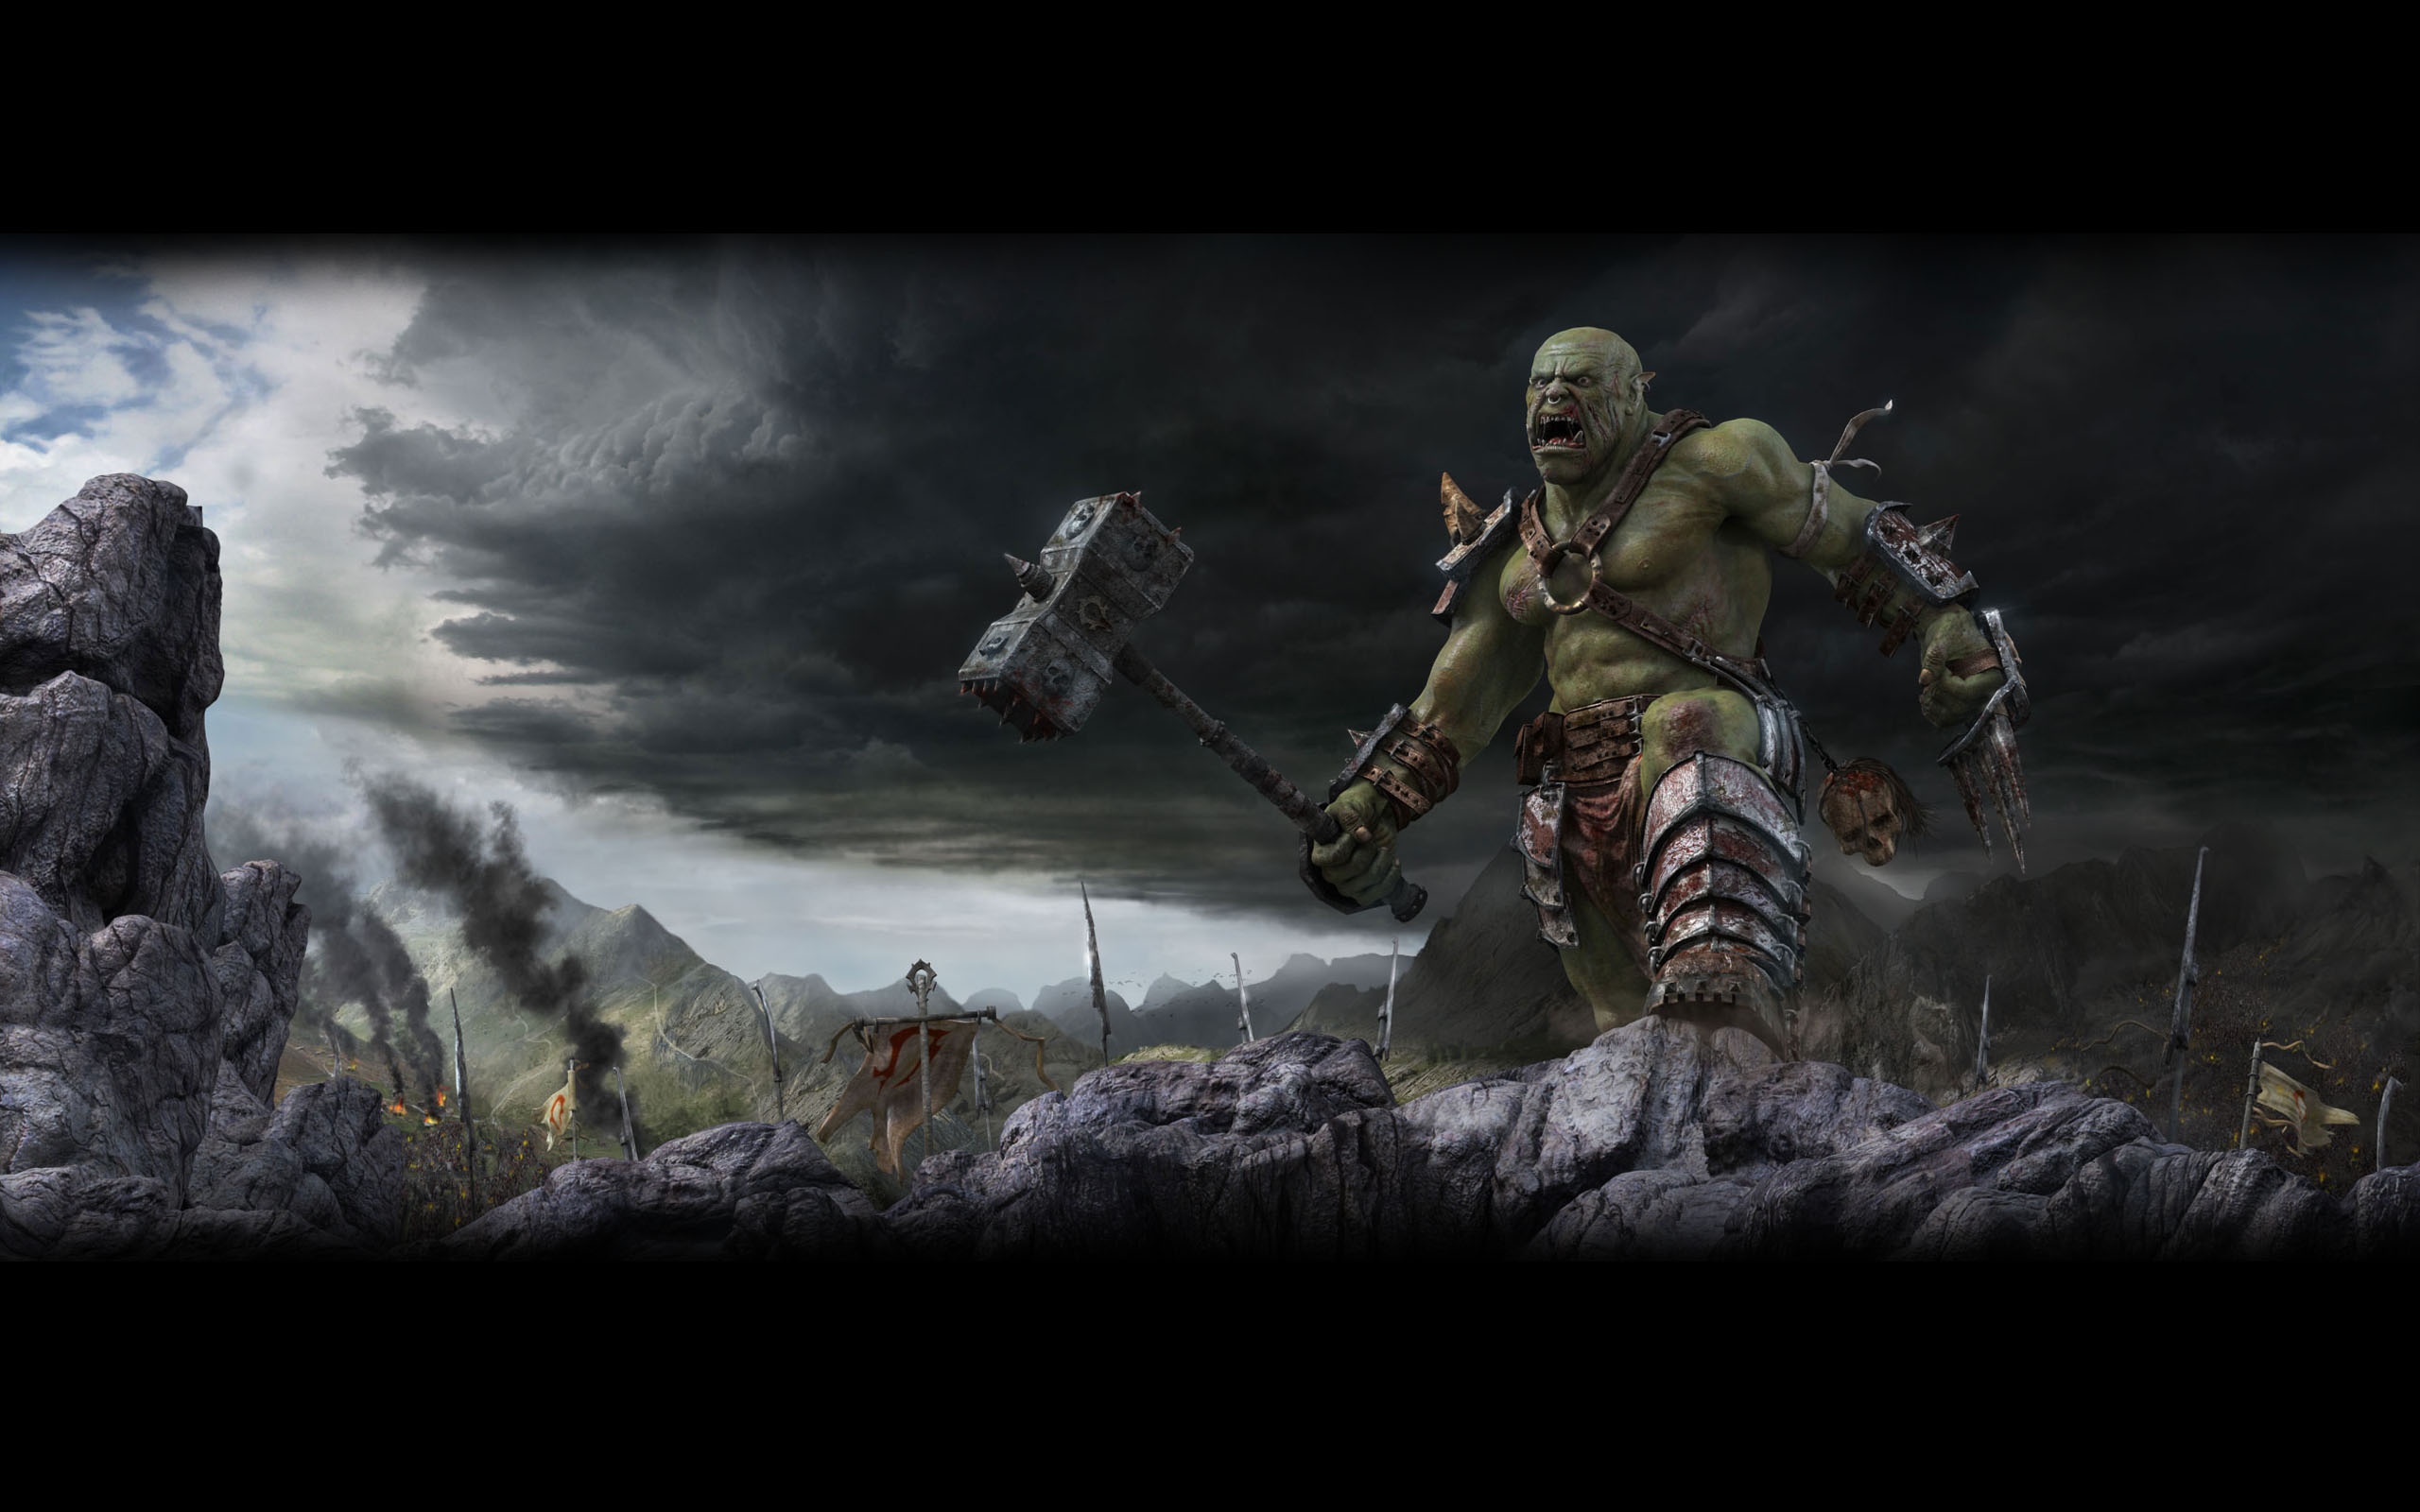 A fearsome orc from a fantasy realm.